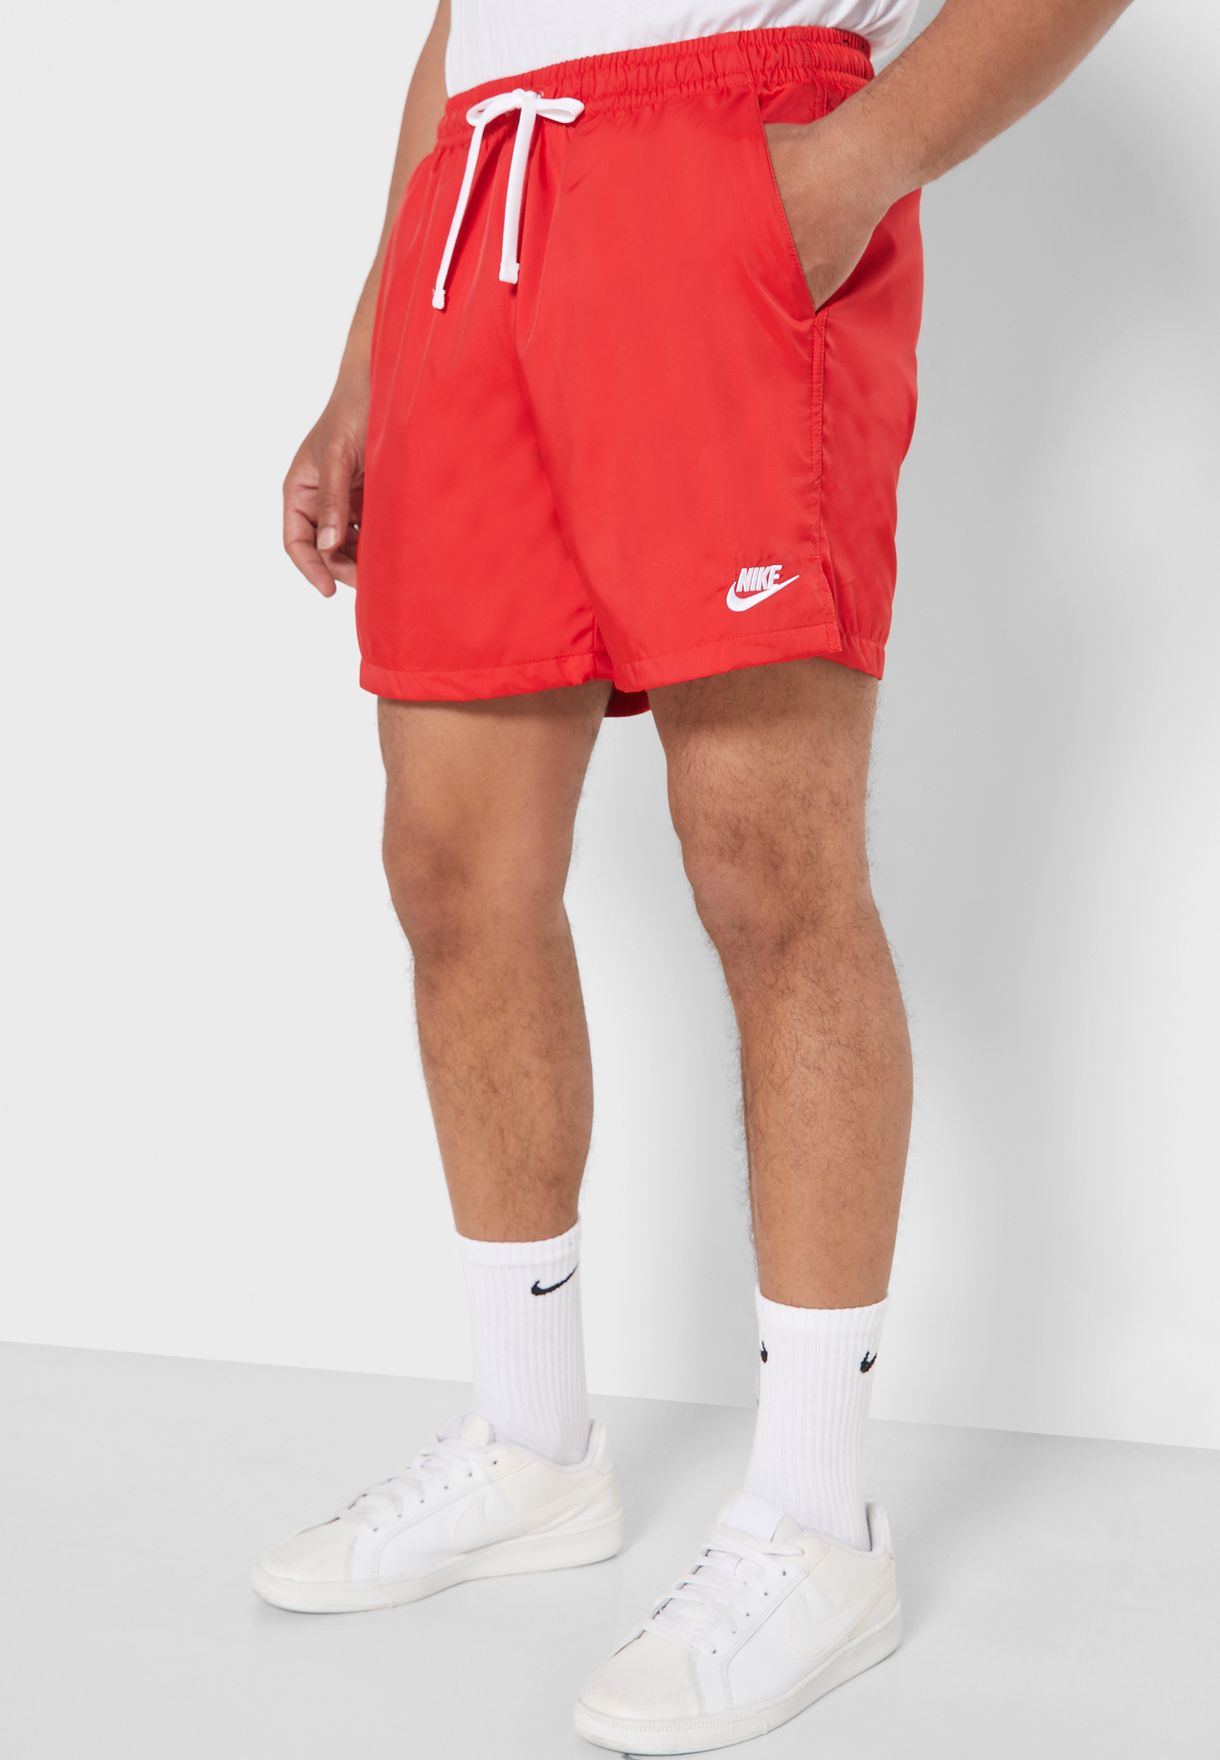 nike shorts above the knee cheap online